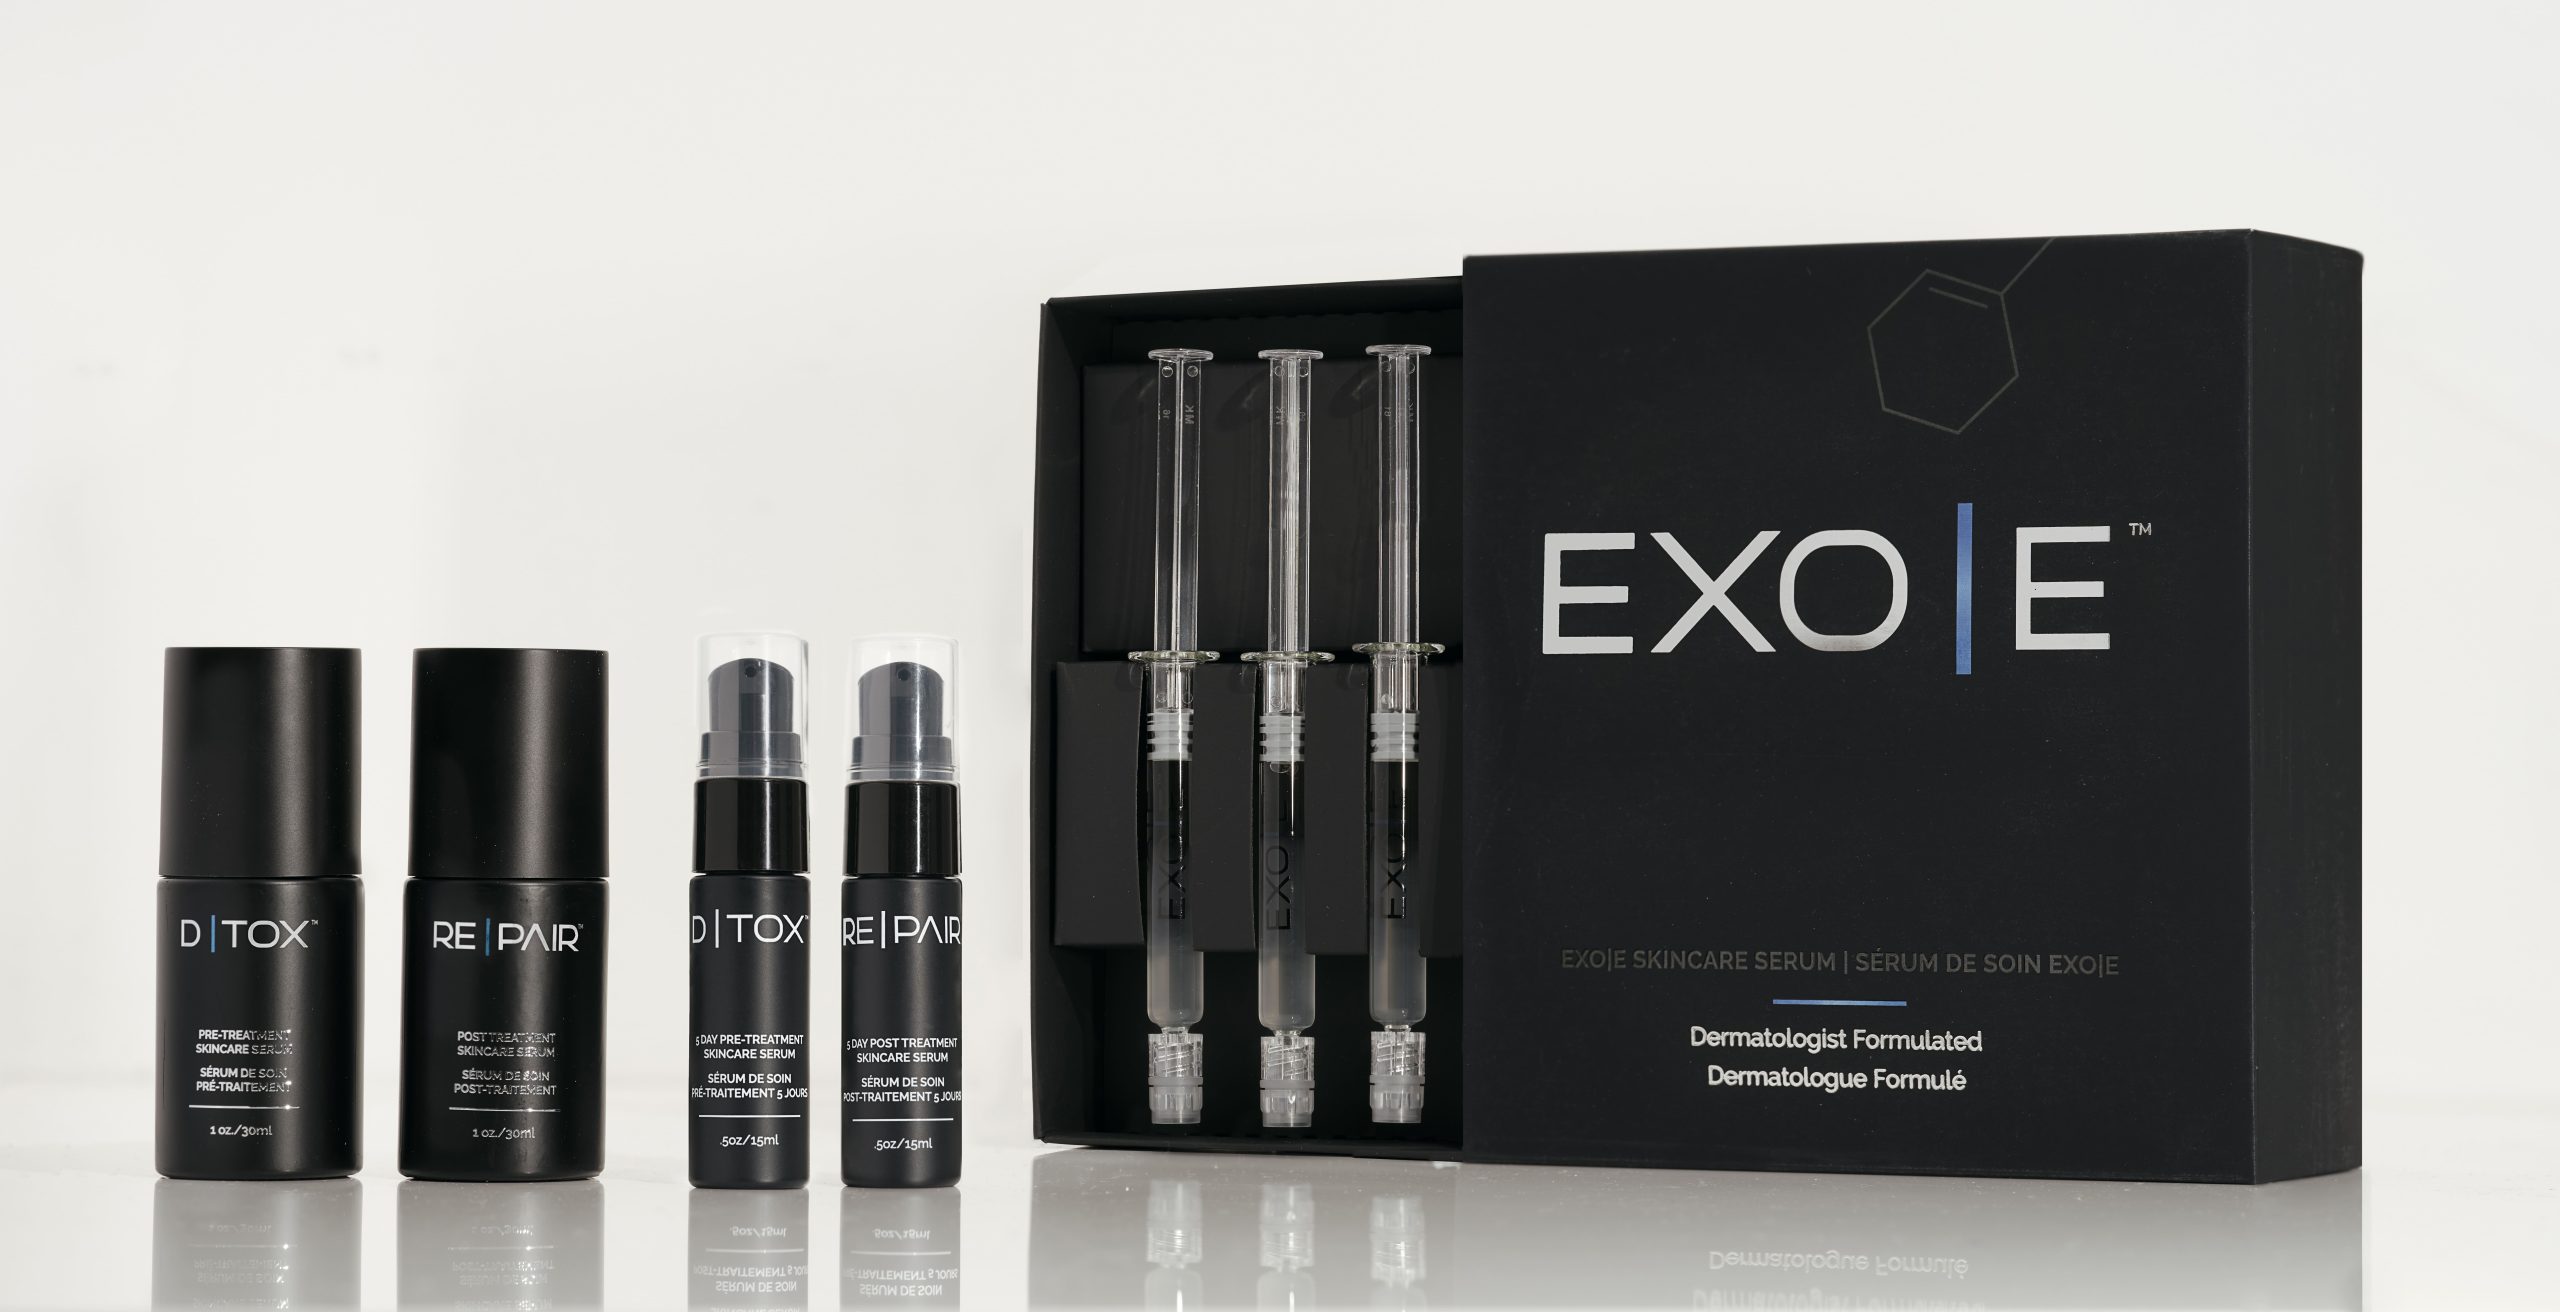 EXO|E Skin Revitalizing Serum in syringes for in-practice use includes D|TOX and RE|PAIR take home serums